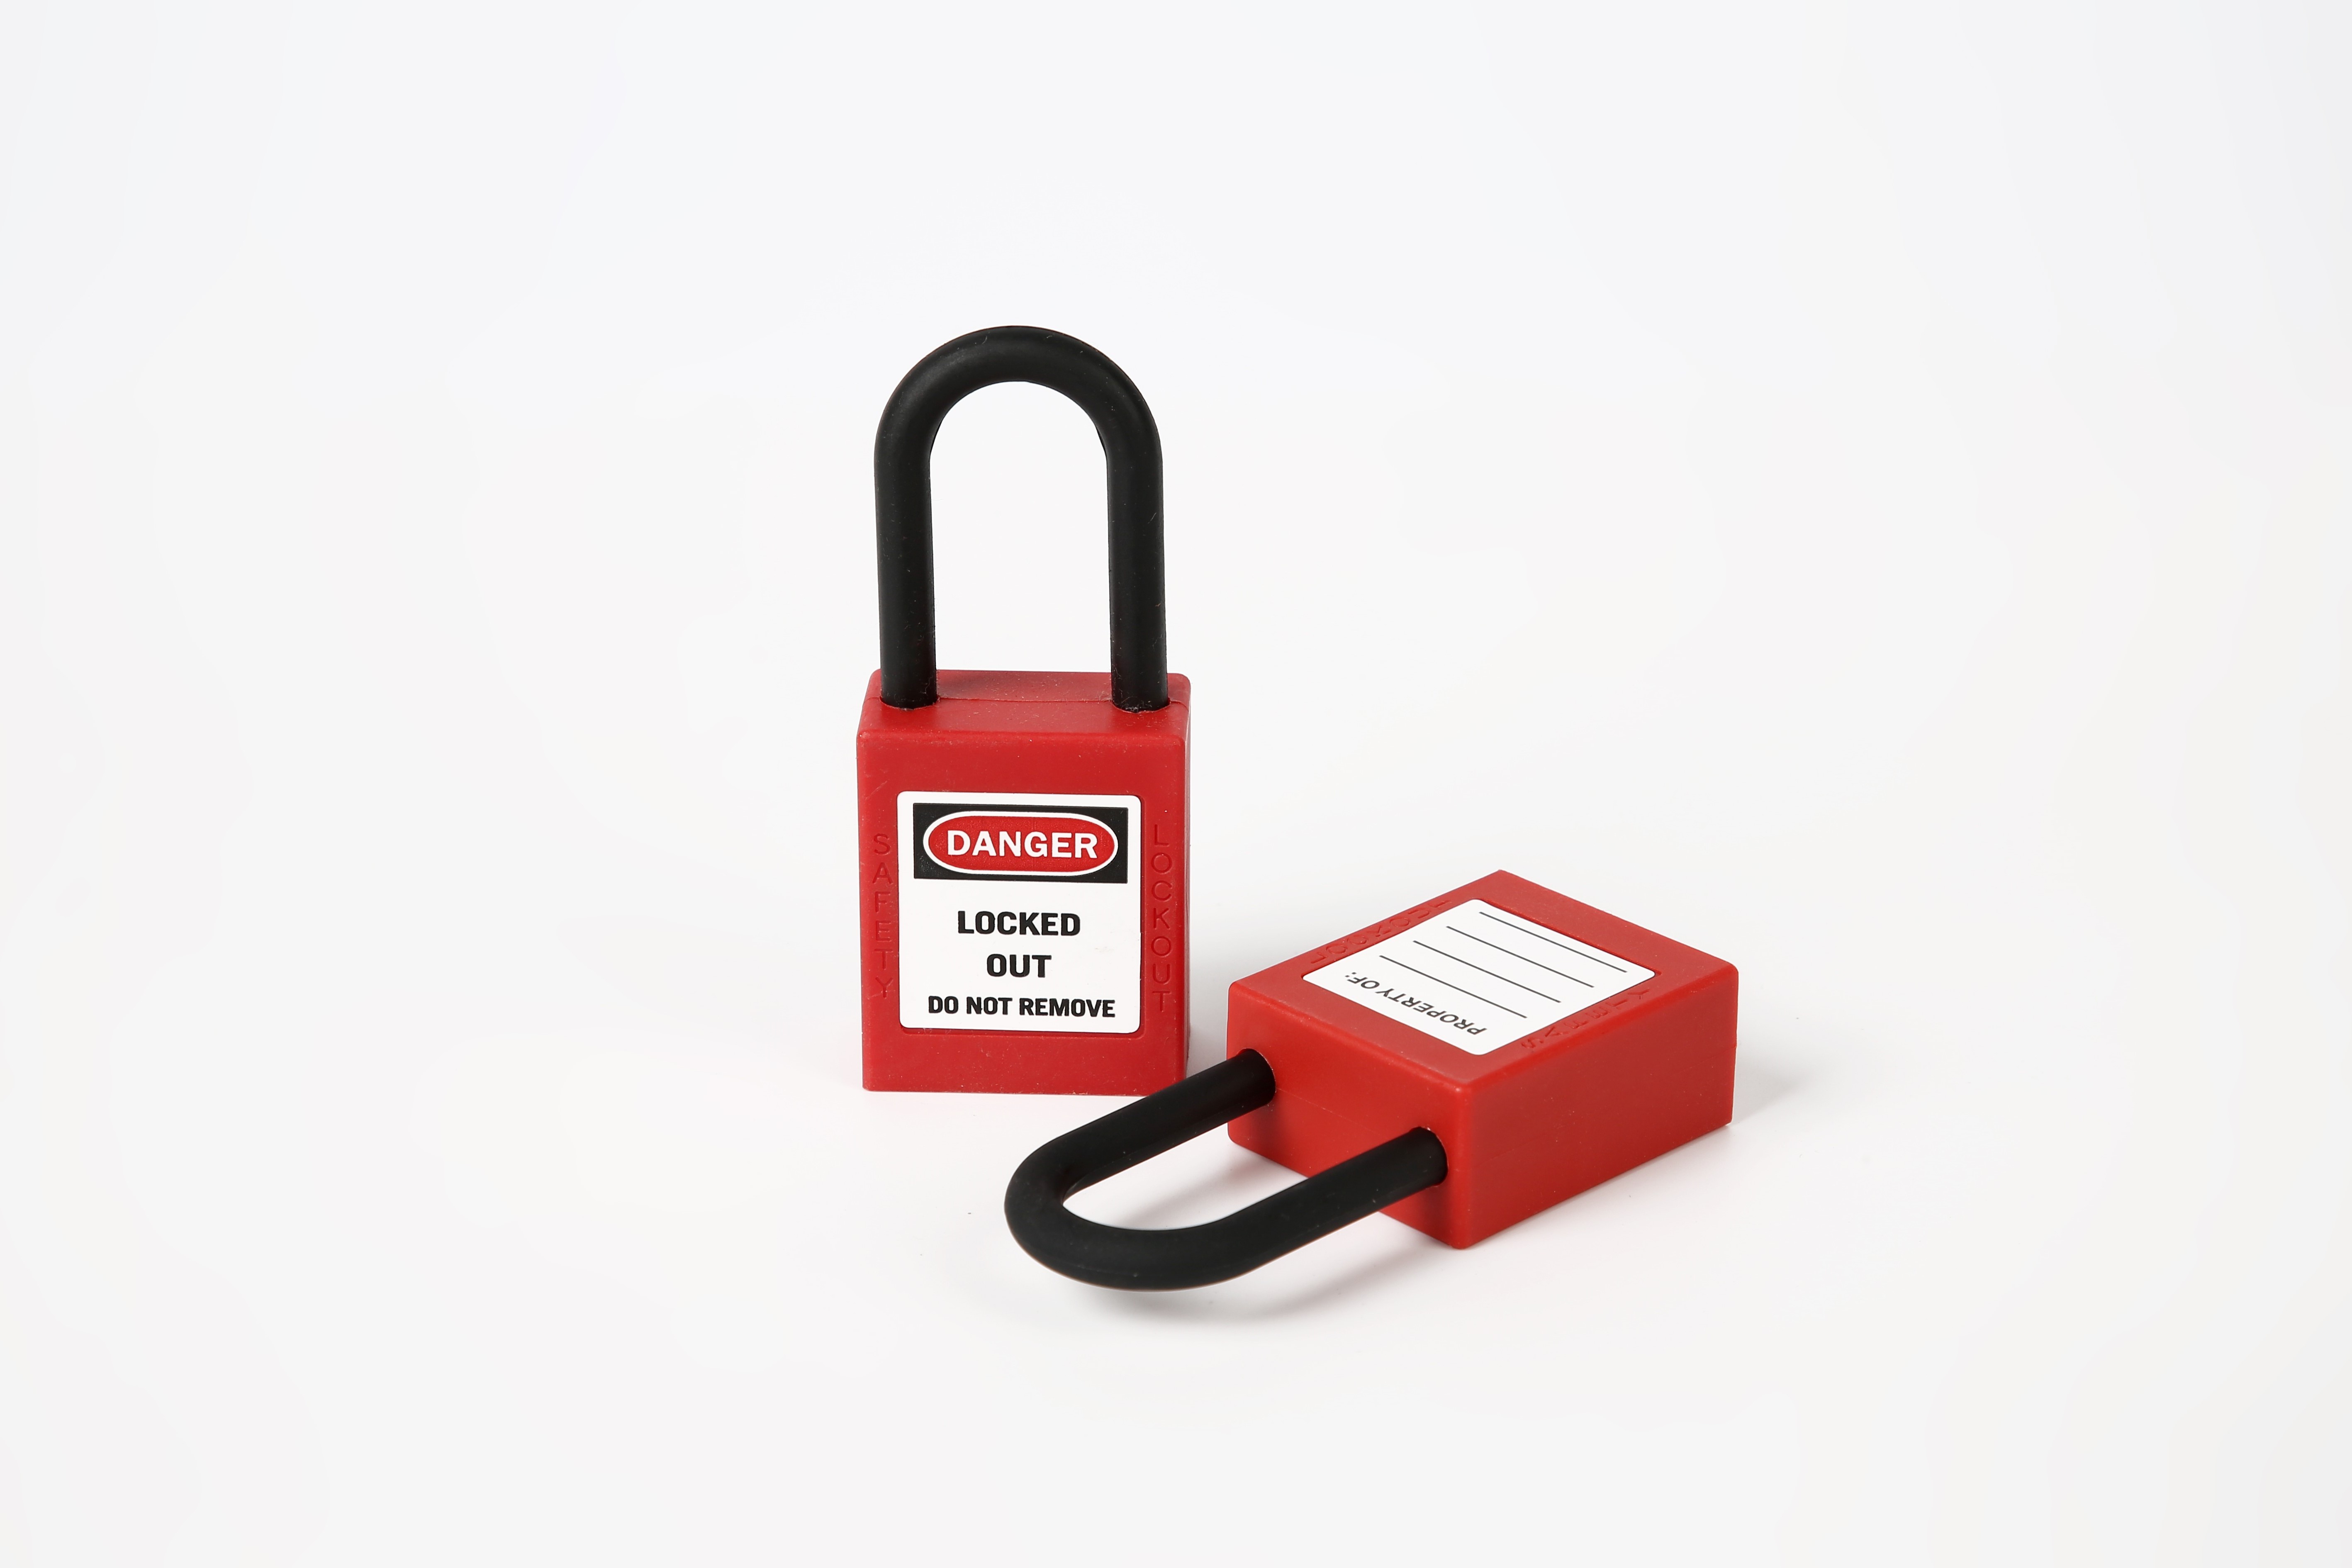 What technologies are needed in the production of safety padlocks?